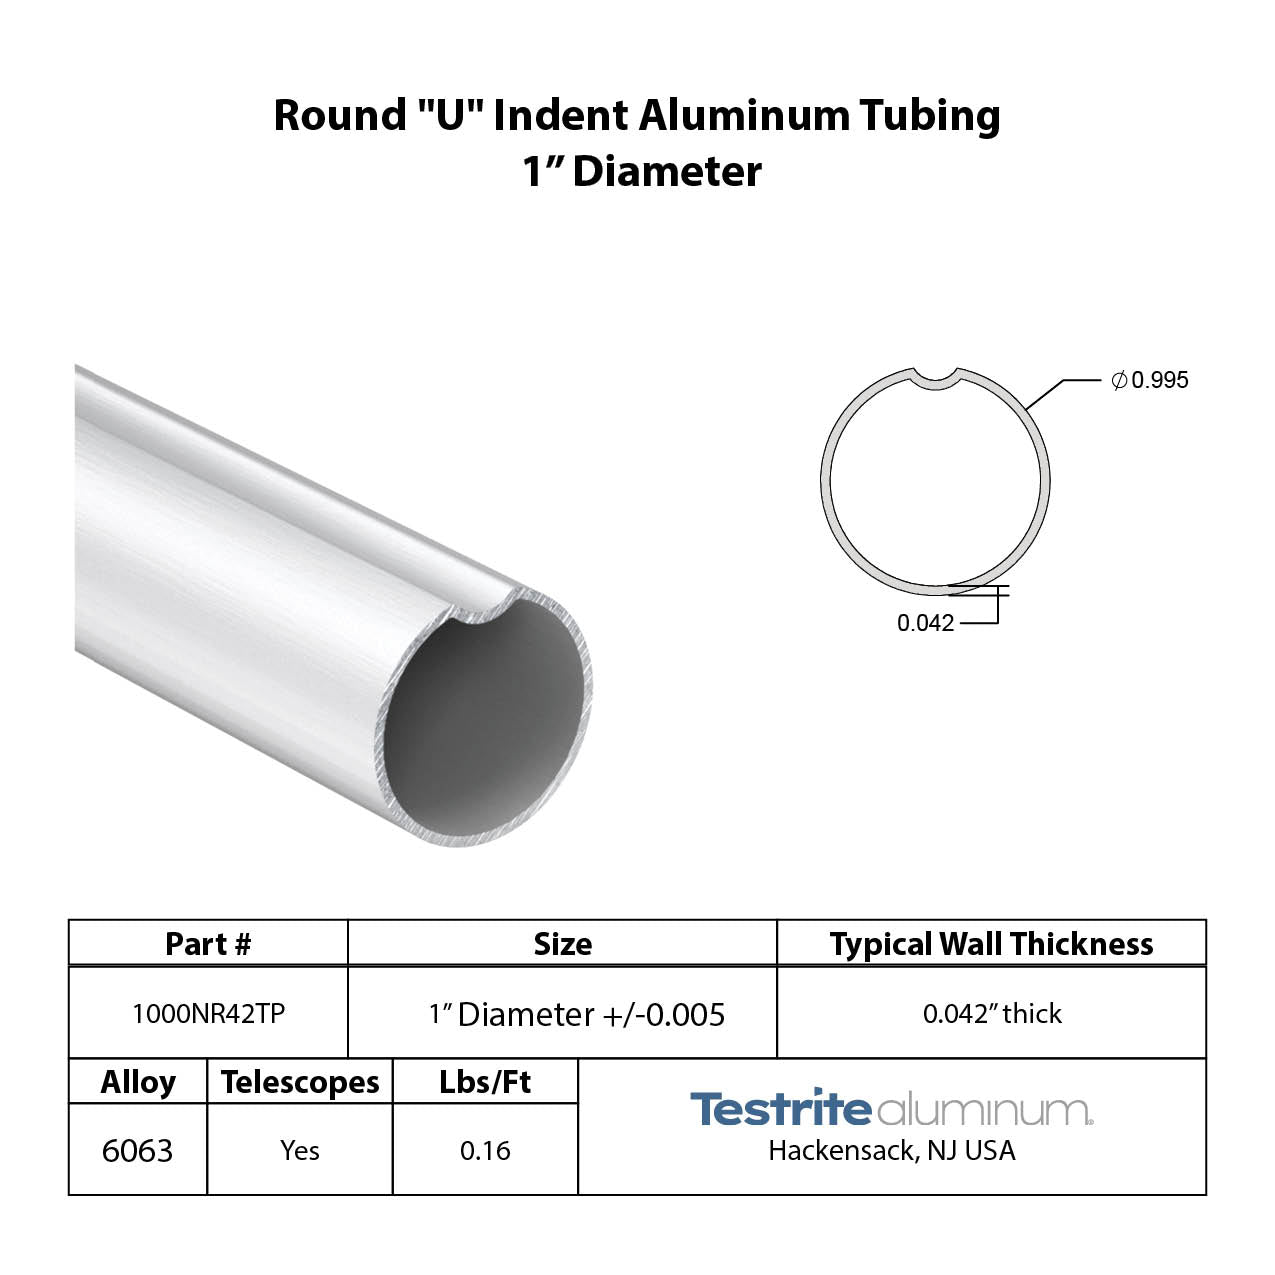 Specification sheet for 1" OD round U indent aluminum tube index key aluminum tubing 1in diameter spec sheet thin wall 1000NR42TP